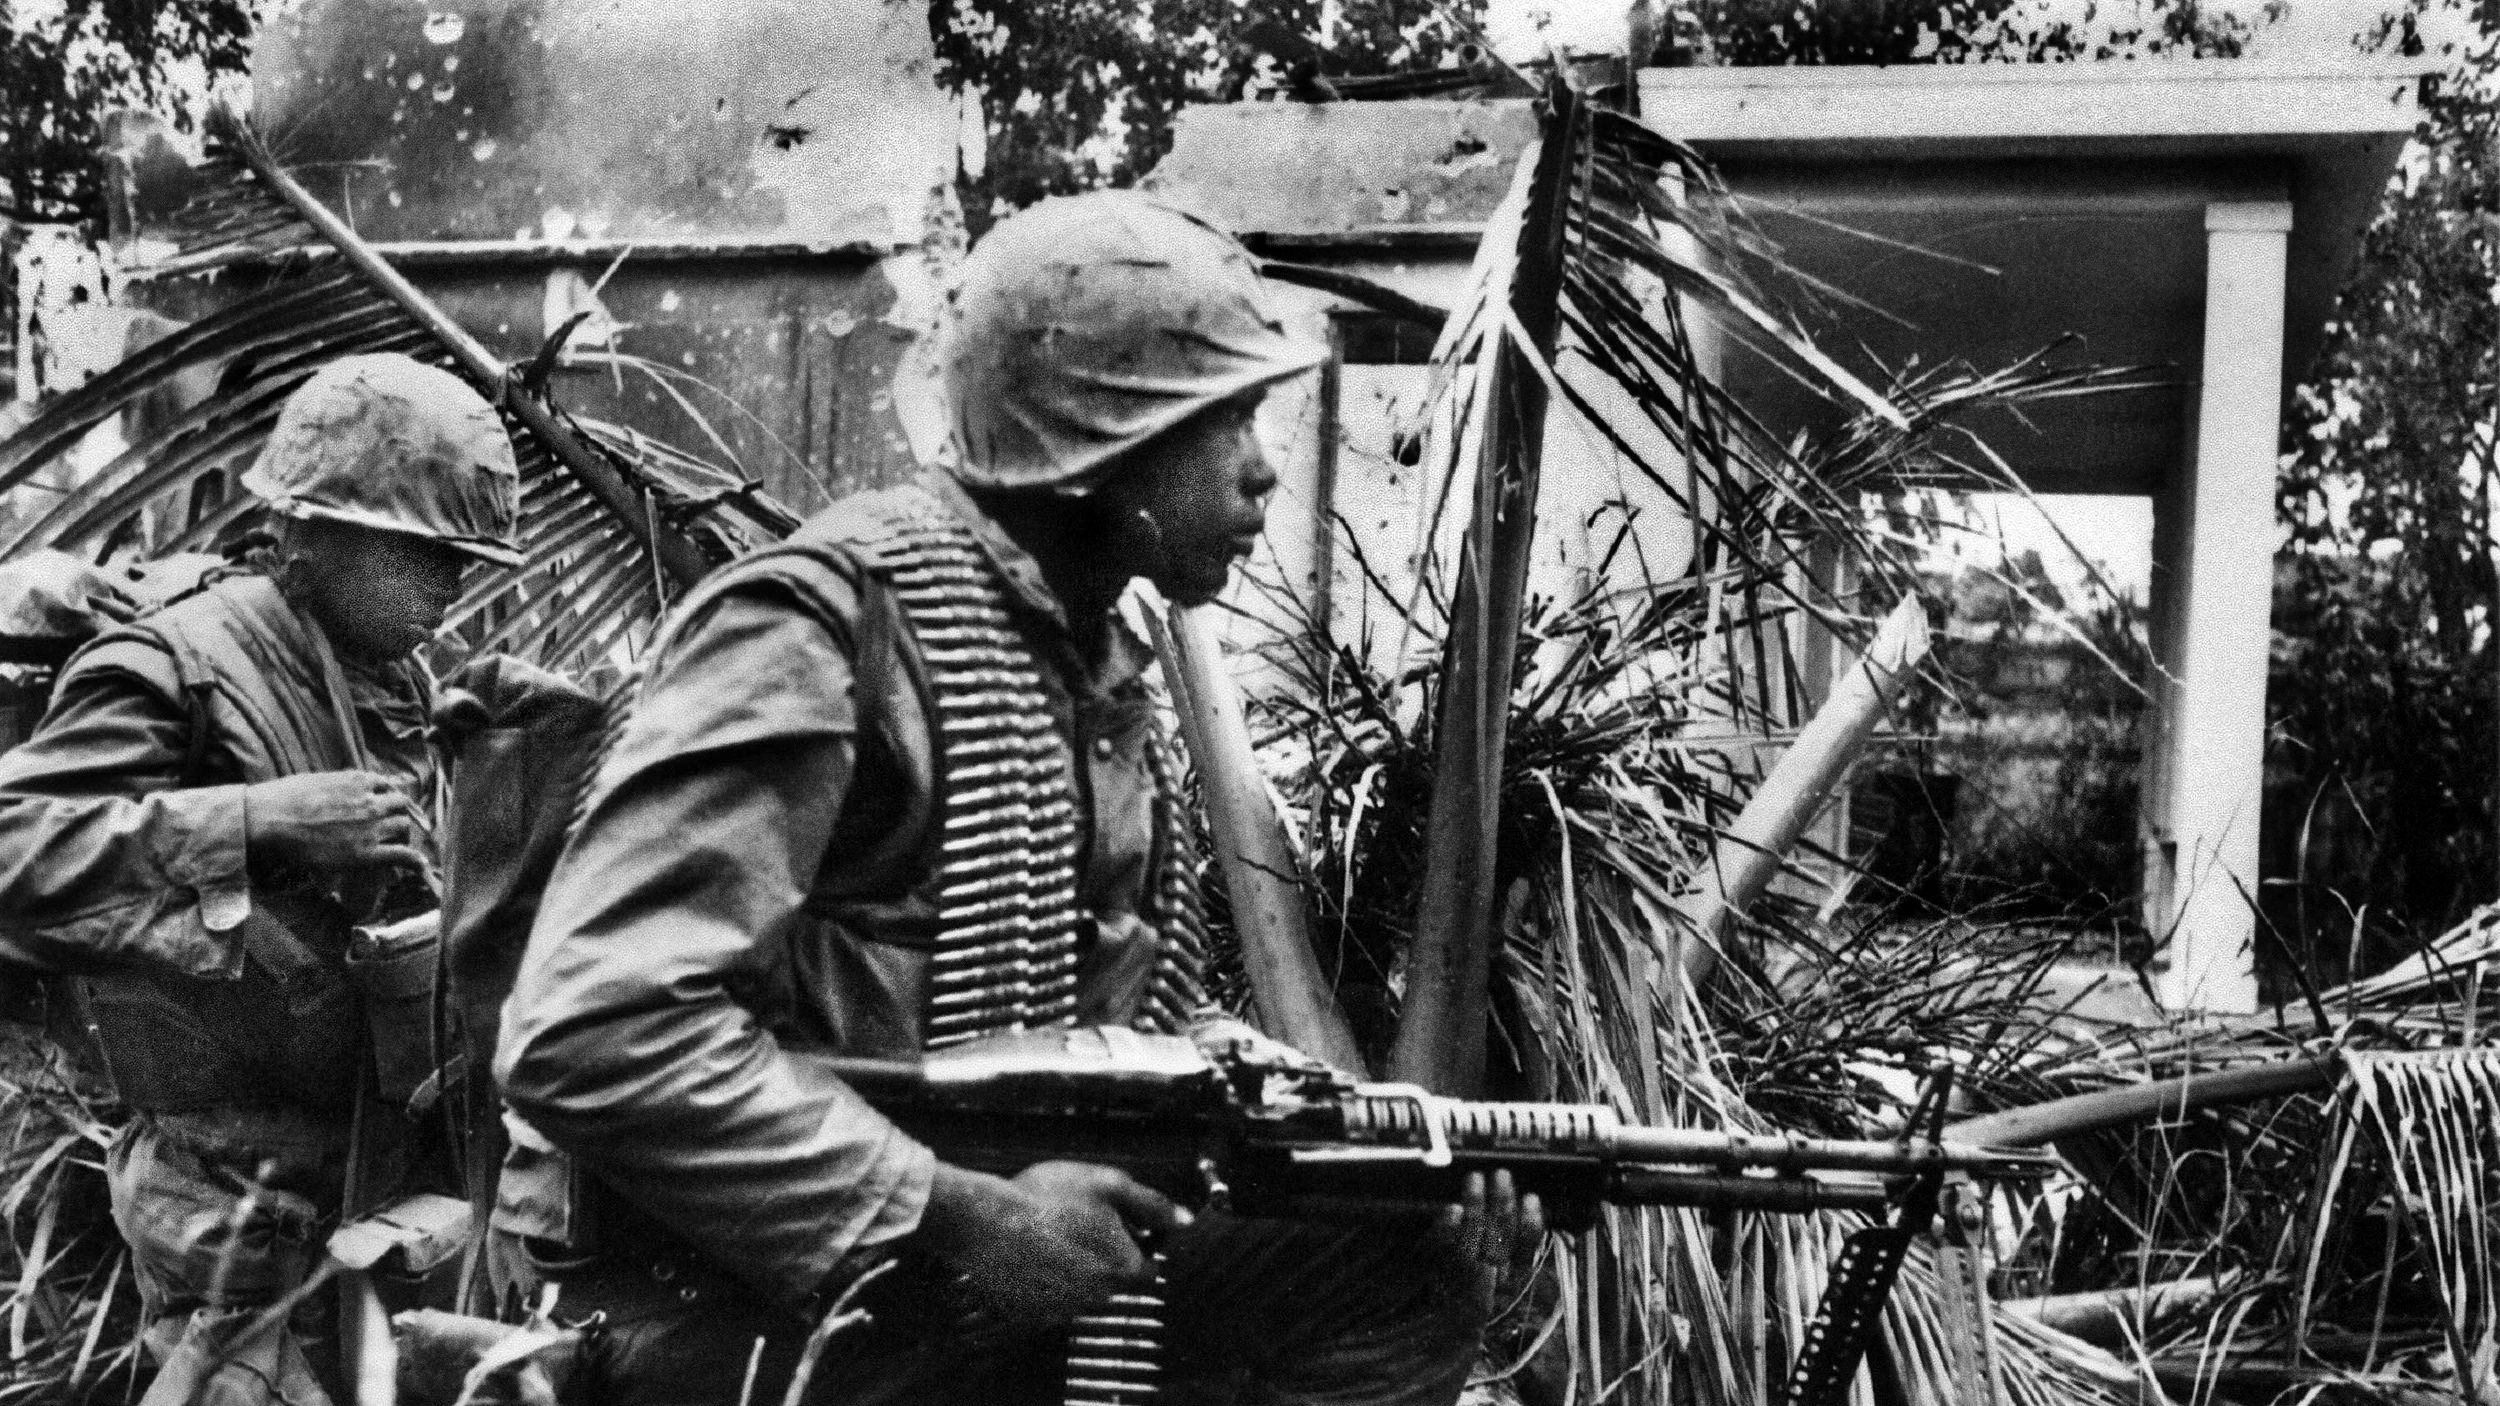 A member of the First Battalion, Fifth Marines with an M60 machine gun watches for North Vietnamese soldiers breaking cover in the battle for Hue, January 31, 1968.